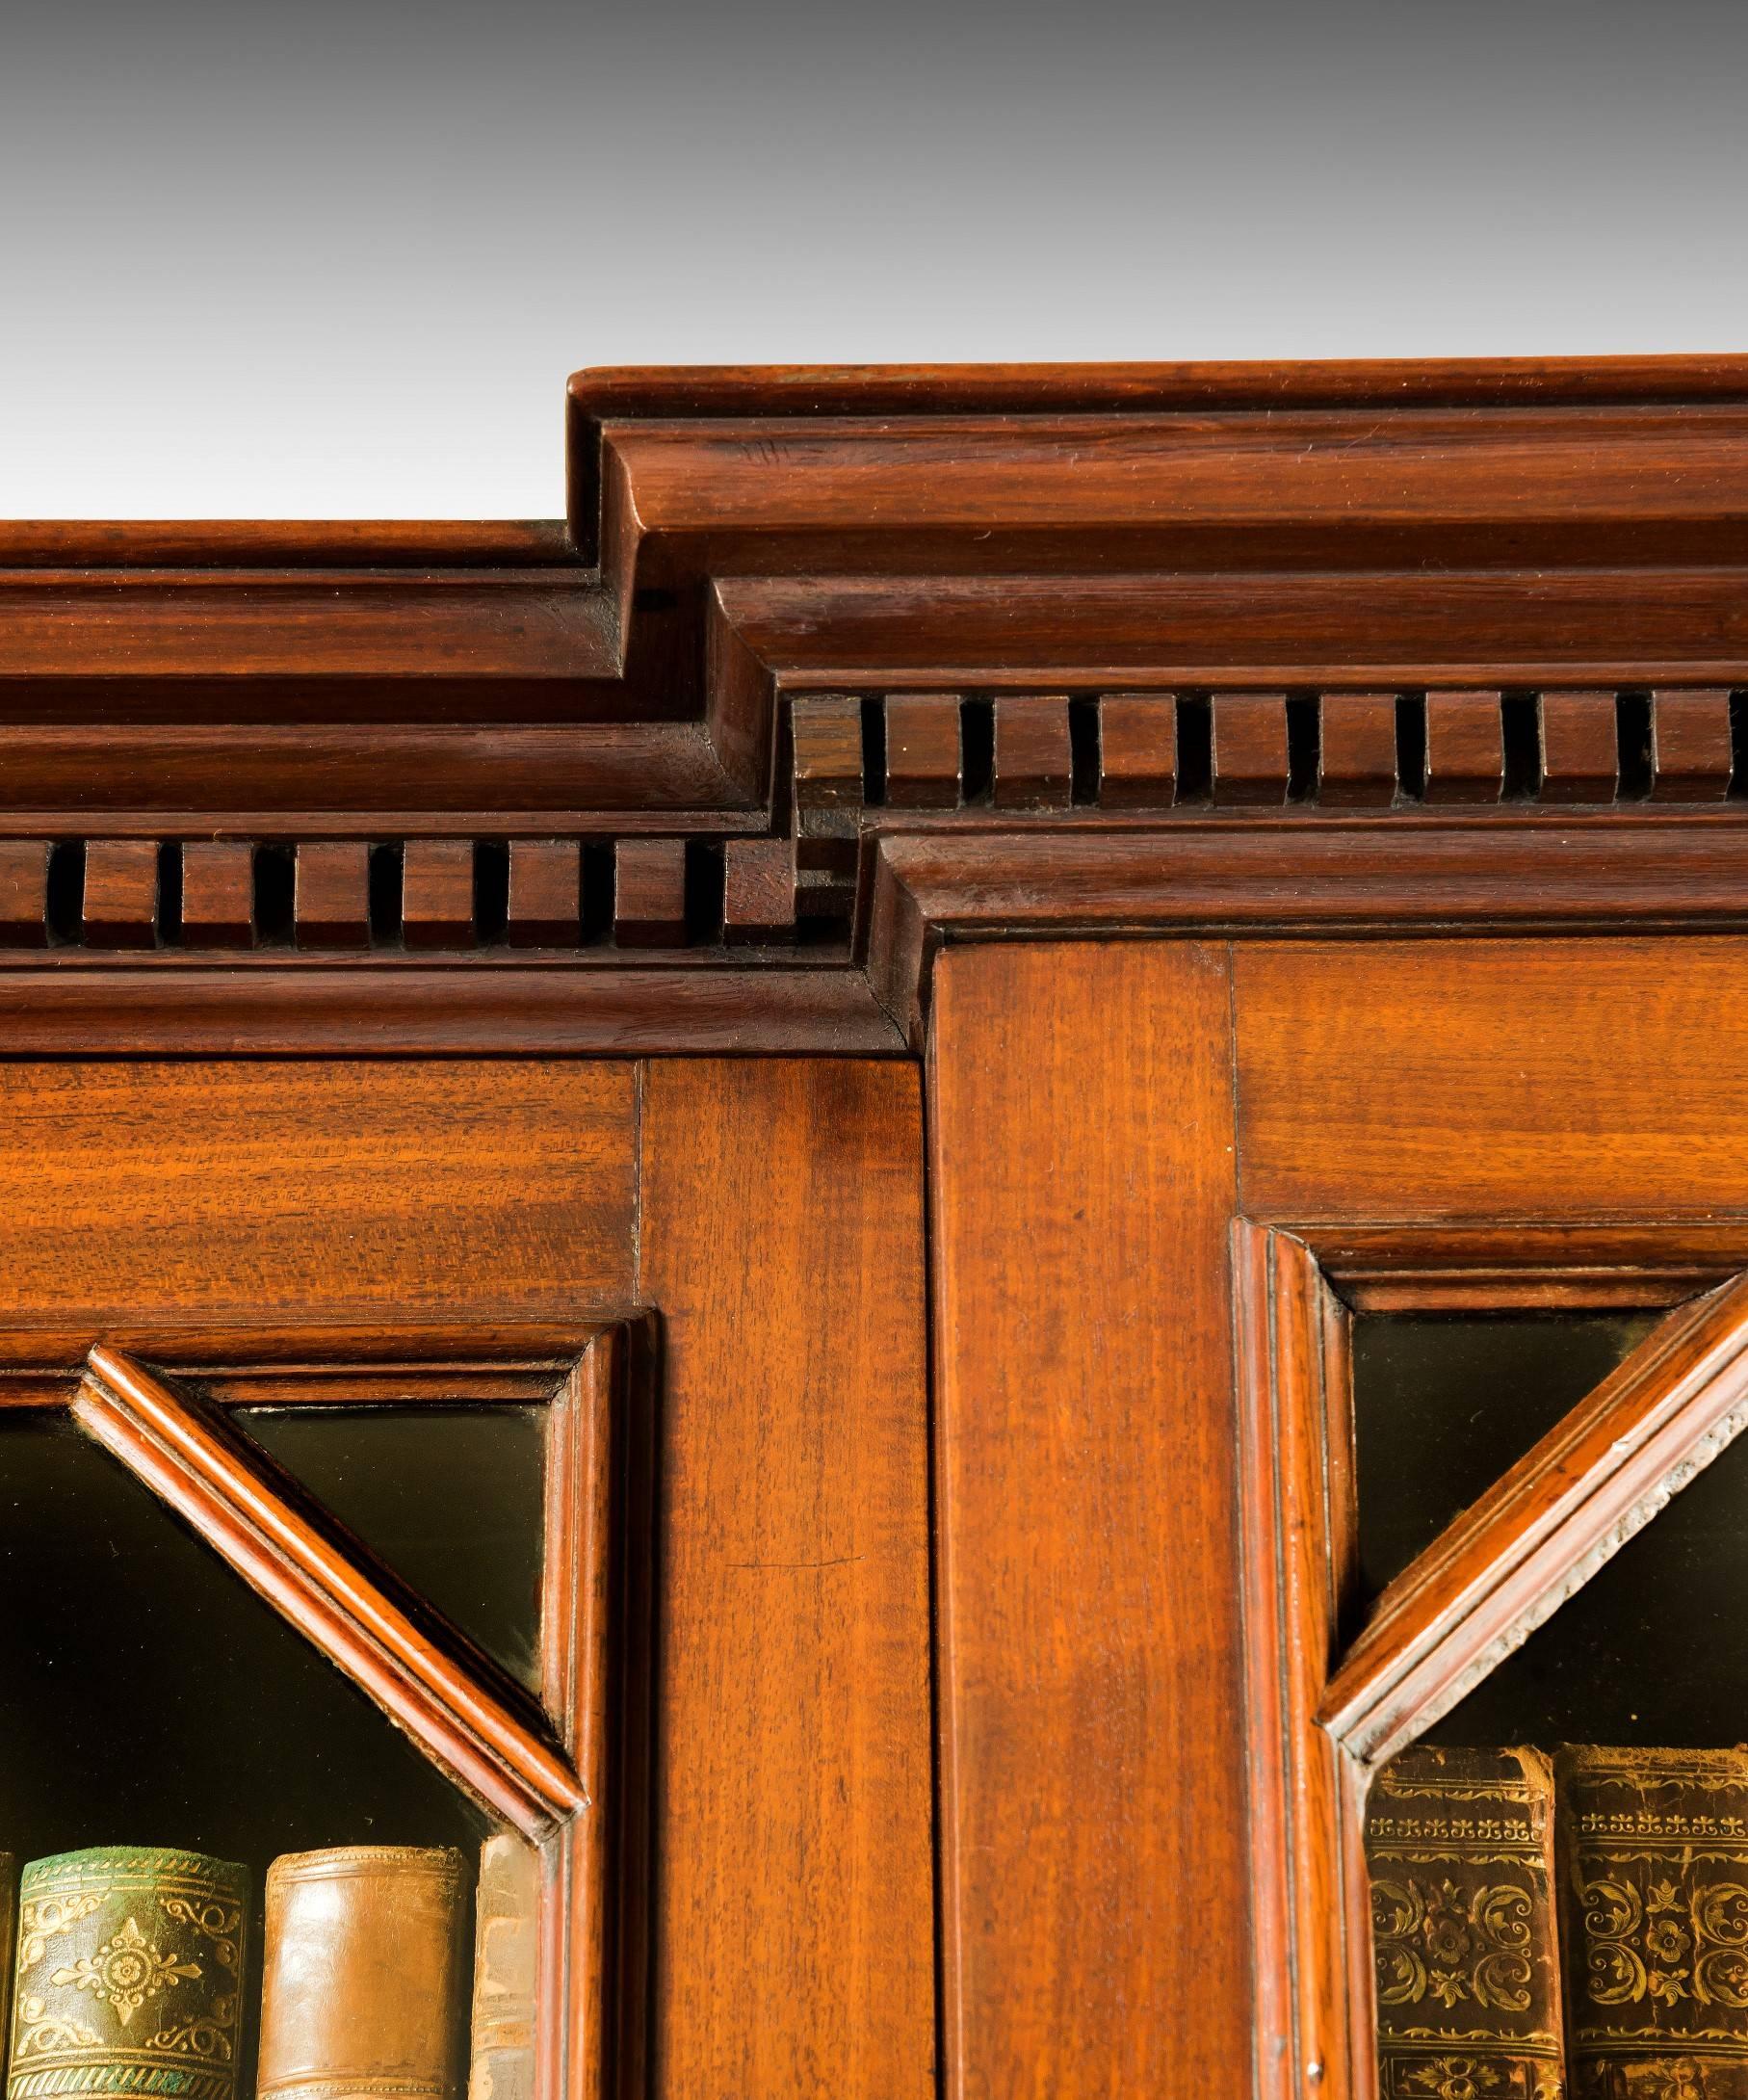 A handsome George II period mahogany breakfront bookcase; the bookcase's dentil moulded cornice above a central astragal glazed door flanked by a glazed door to either side which enclose fully adjustable bookshelves; below are a central bank of four